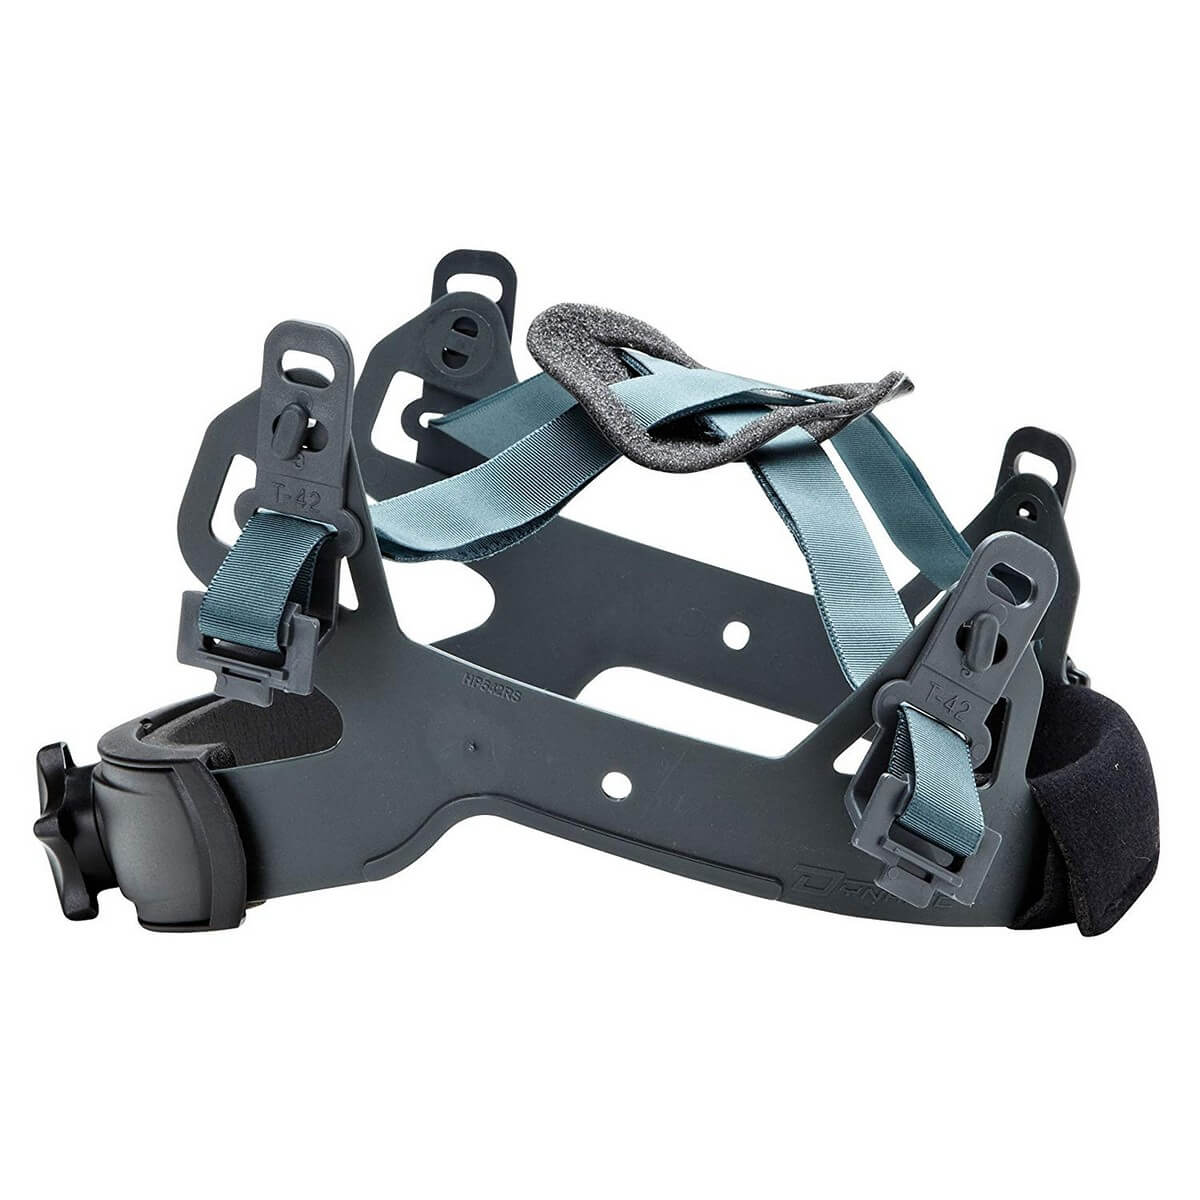 Dynamic Hard hat harness fits HP542 and HP641 - wise-line-tools